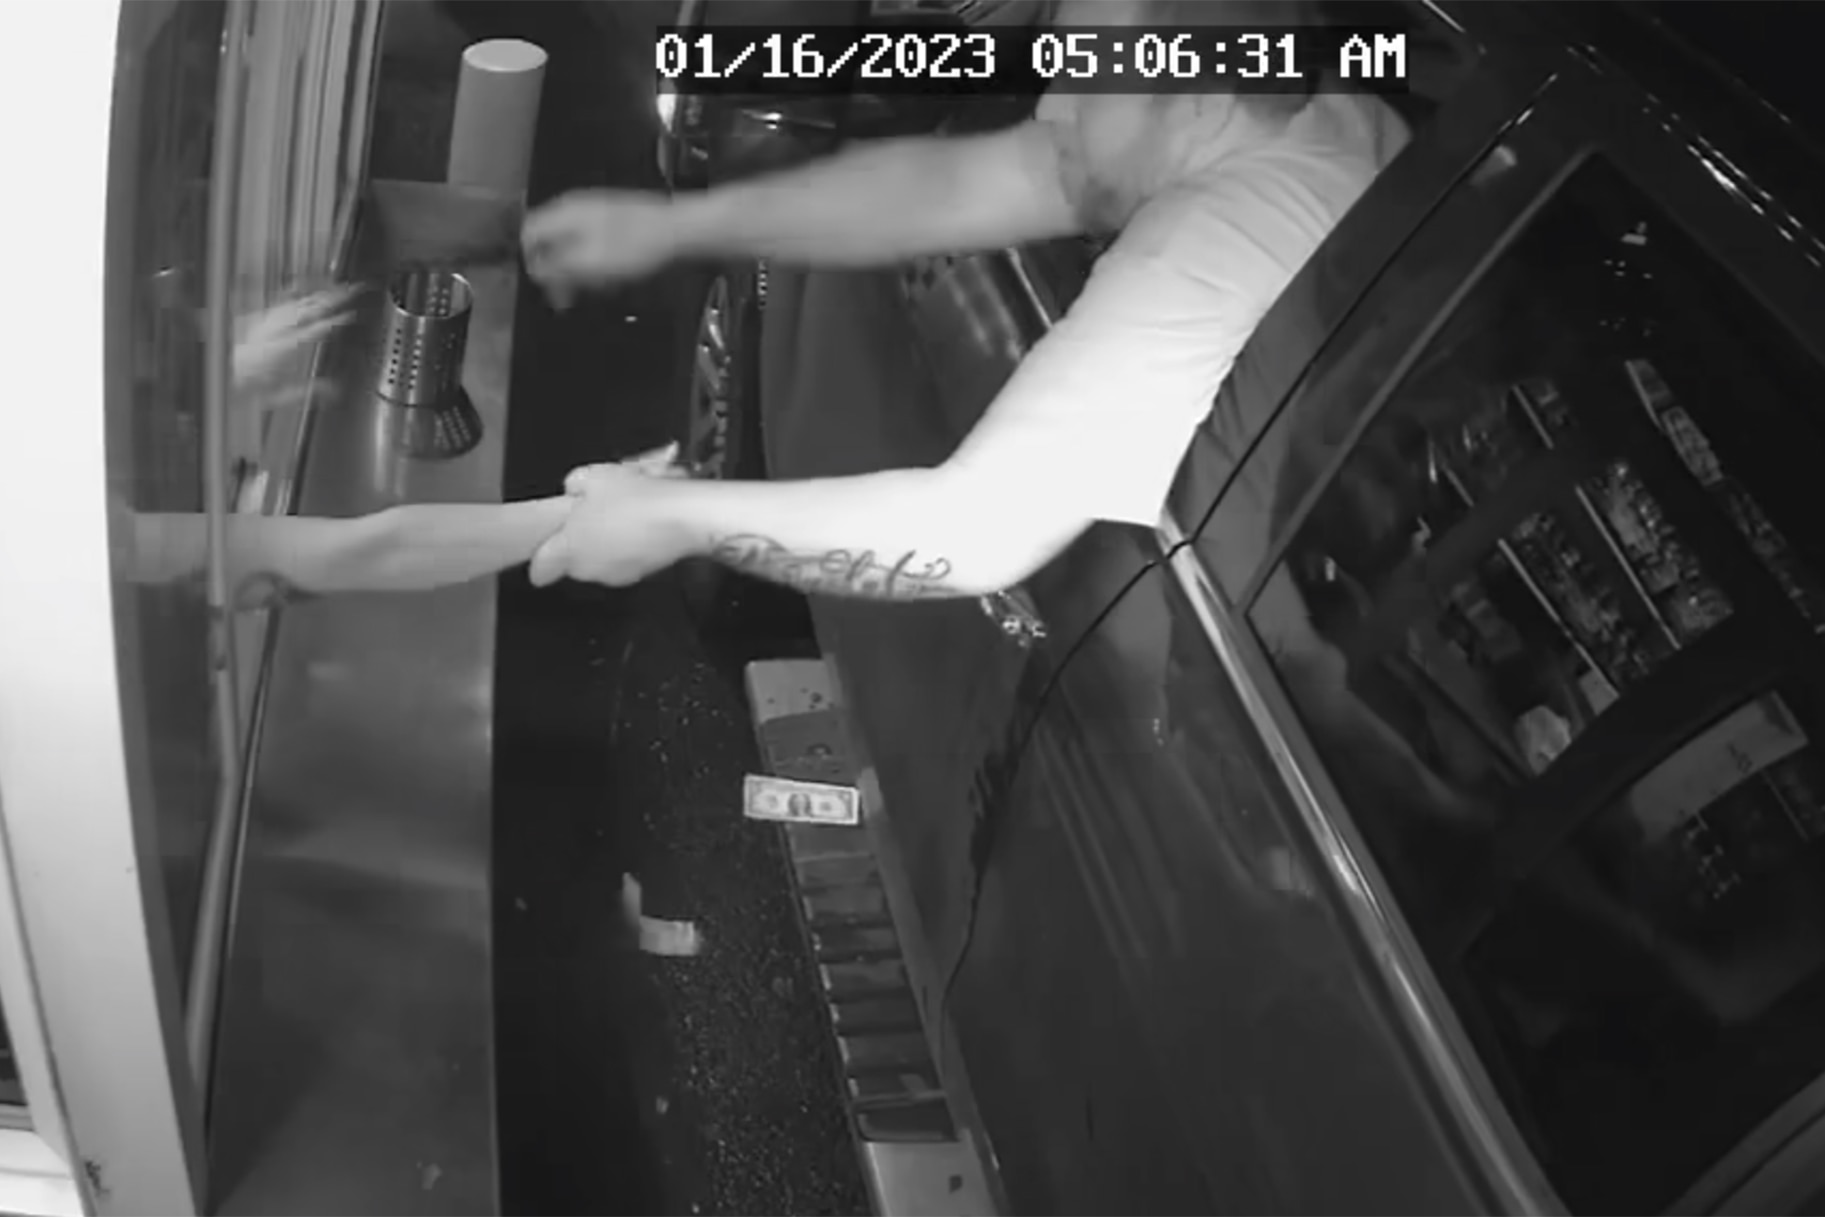 The Suspect seen Grabbing Woman From Drive Thru